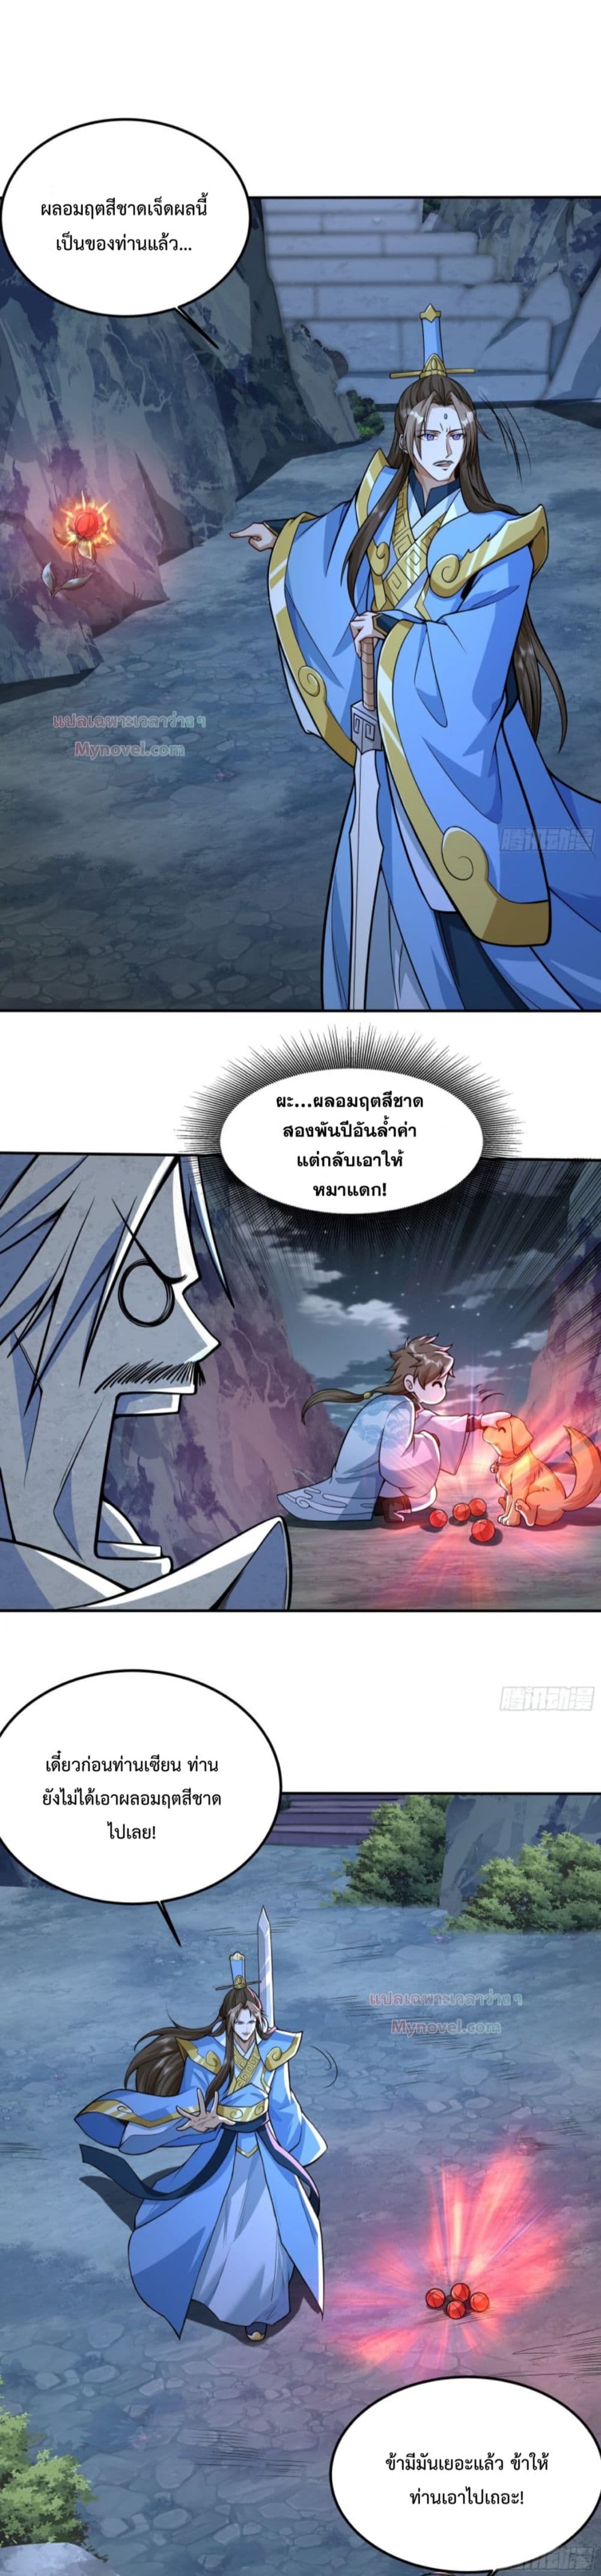 The Strongest Human in the Three Kingdoms ตอนที่ 1 (11)